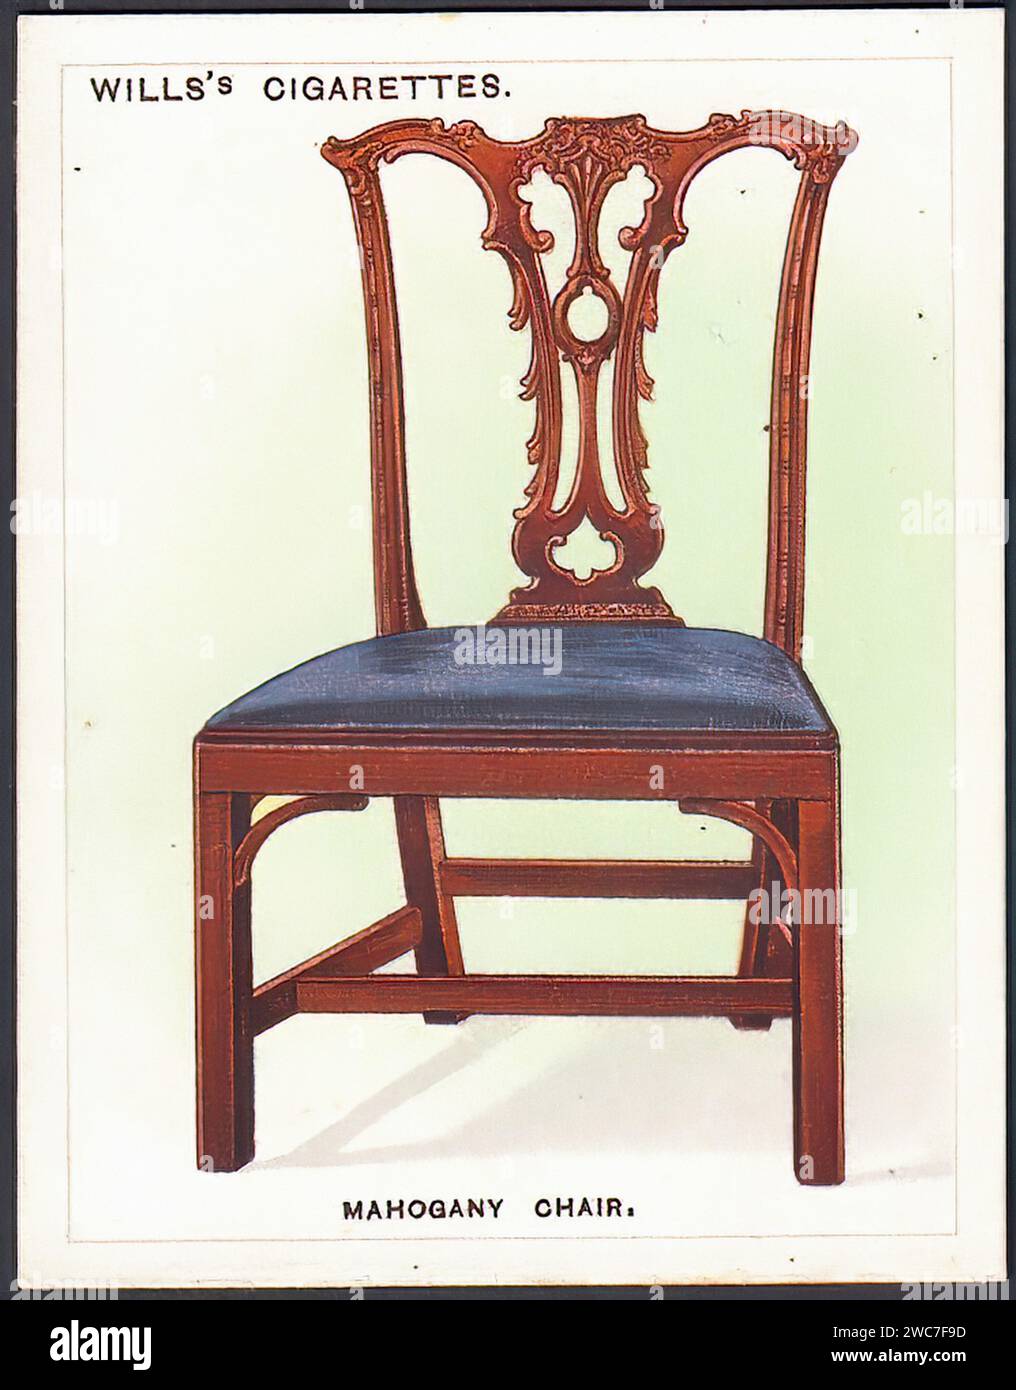 Chippendale Mahogany Chair 001 - Vintage Cigarette Card Illustration Stock Photo